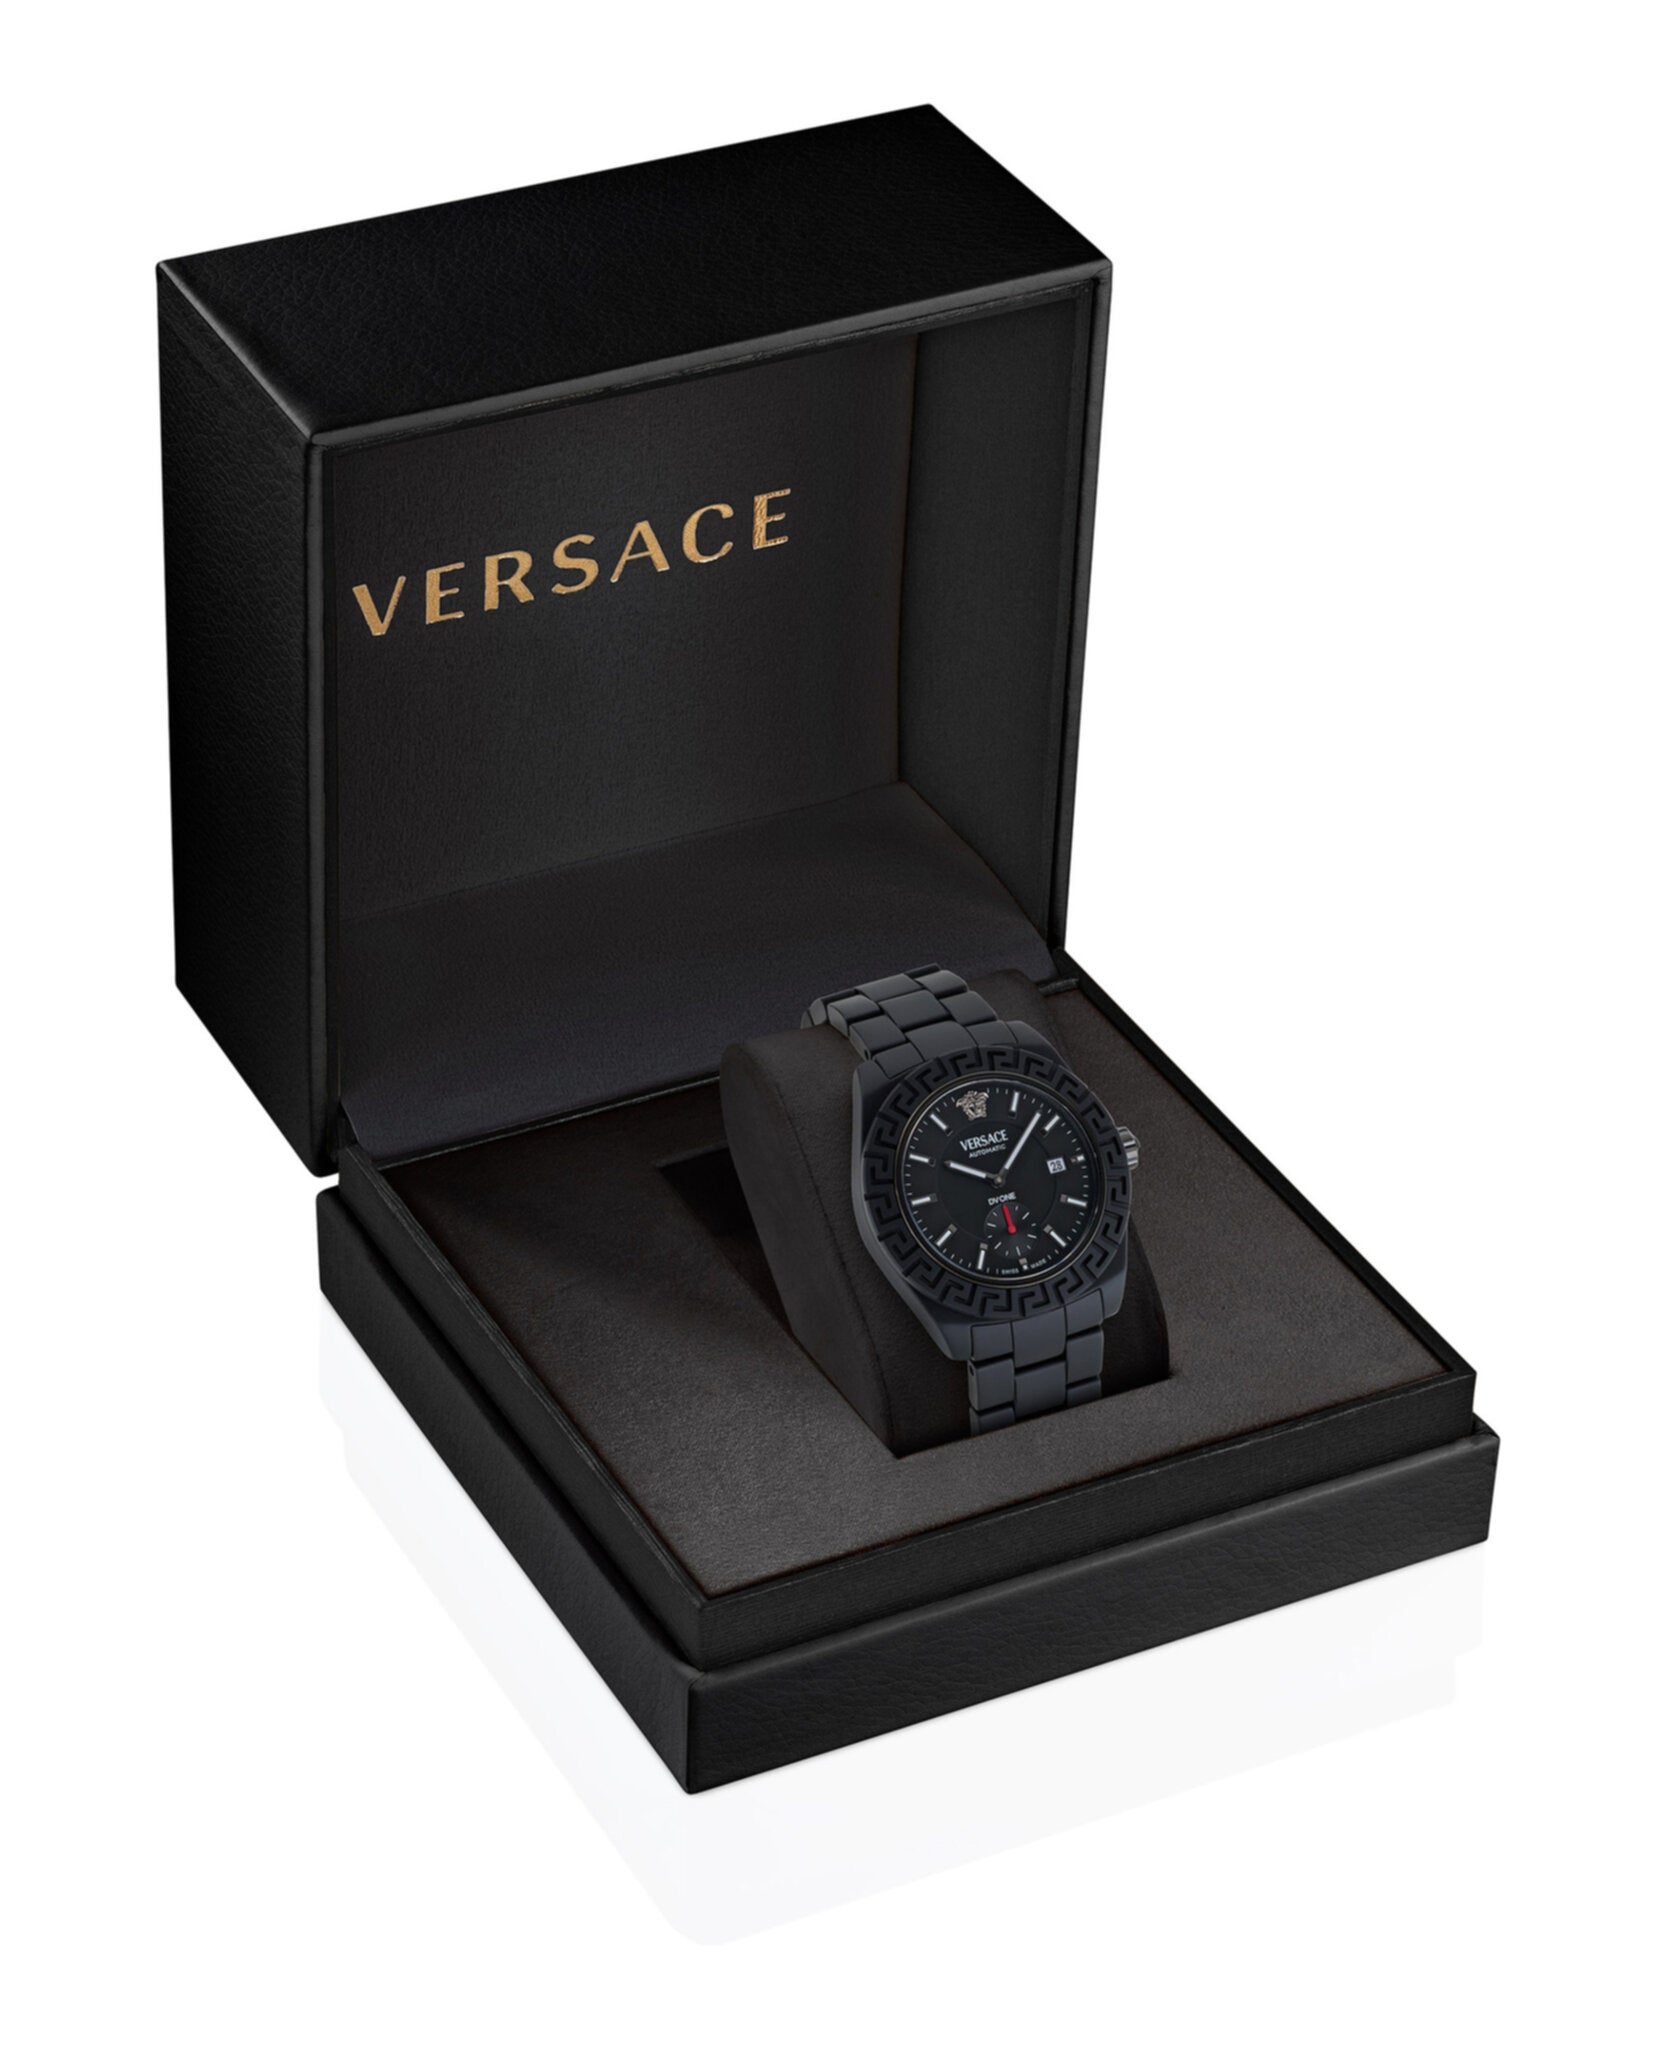 Versace Mens DV One Watches | MadaLuxe Time – Madaluxe Time